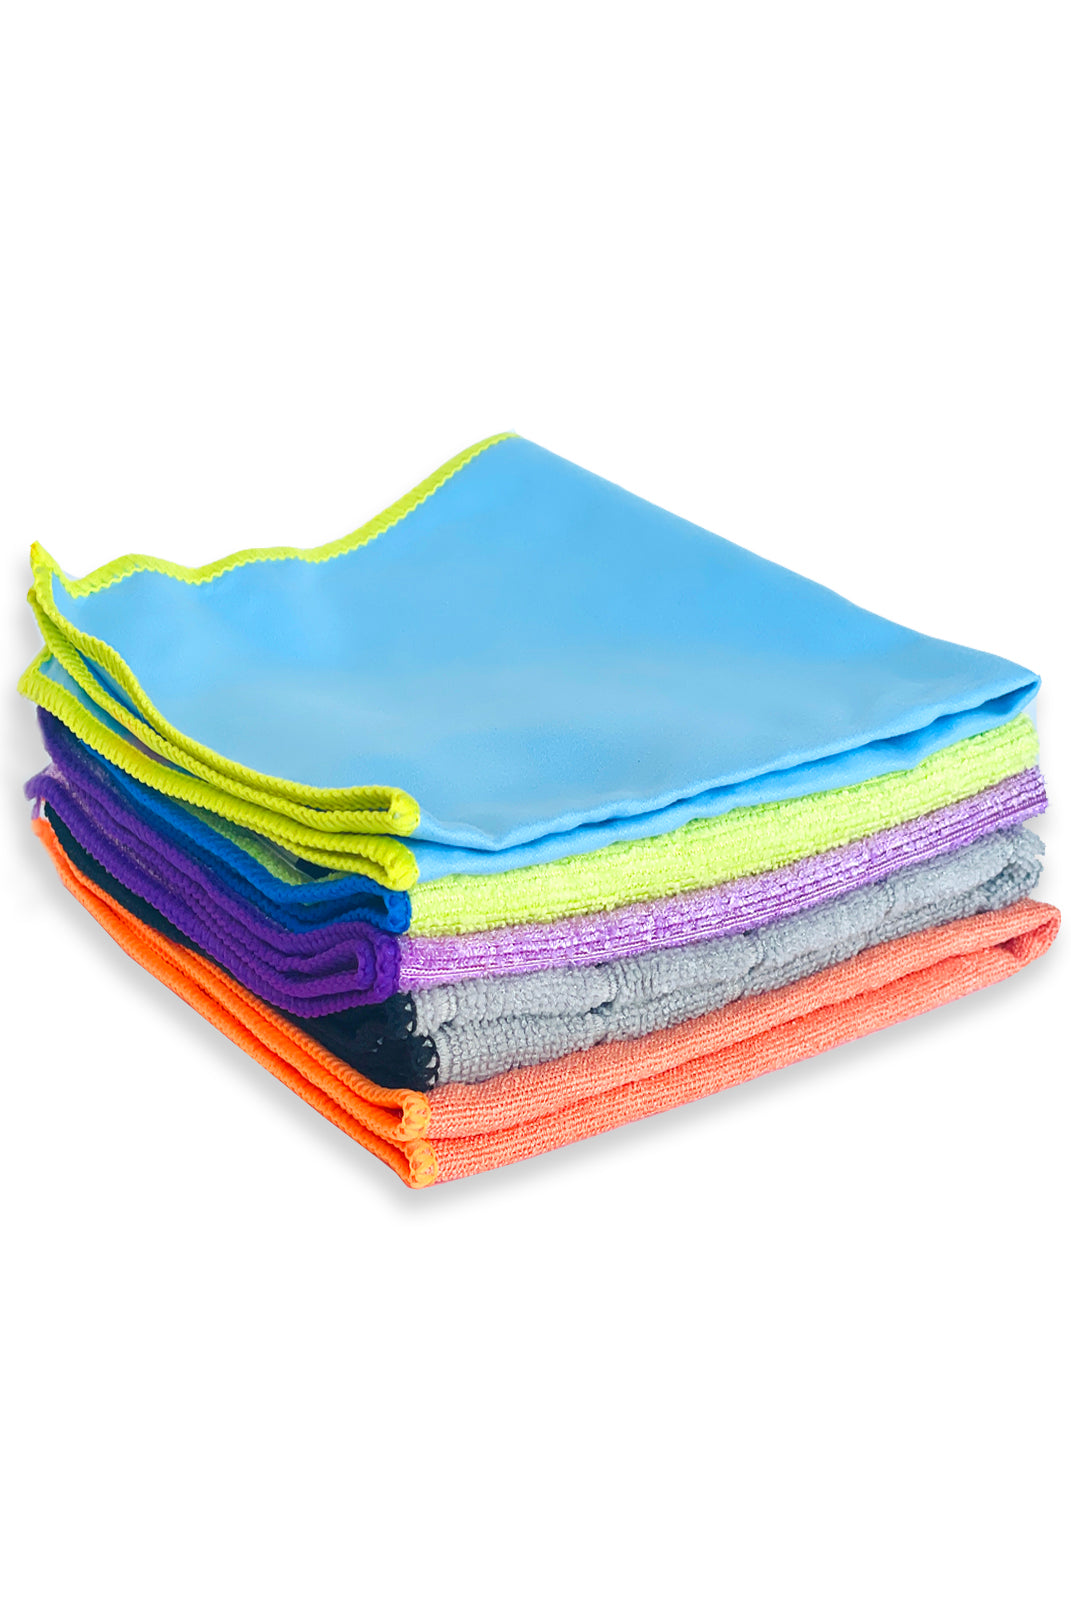 Watch Cleaning Care Cloth – Watch Box Co.